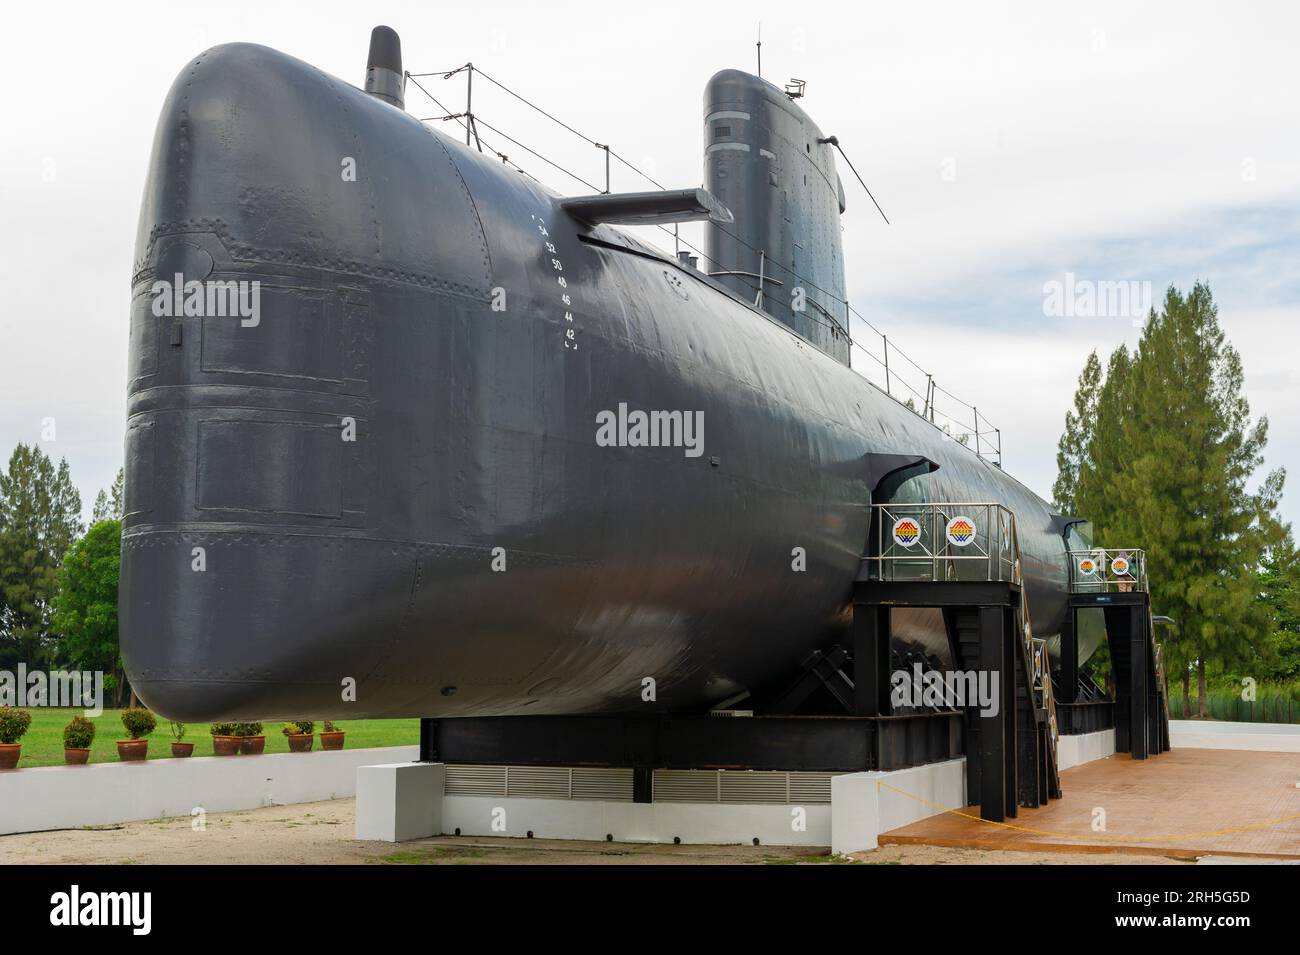 Exterior of the Royal Malaysian Navy submarine Quessant at the Malacca Submarine Museum Stock Photo